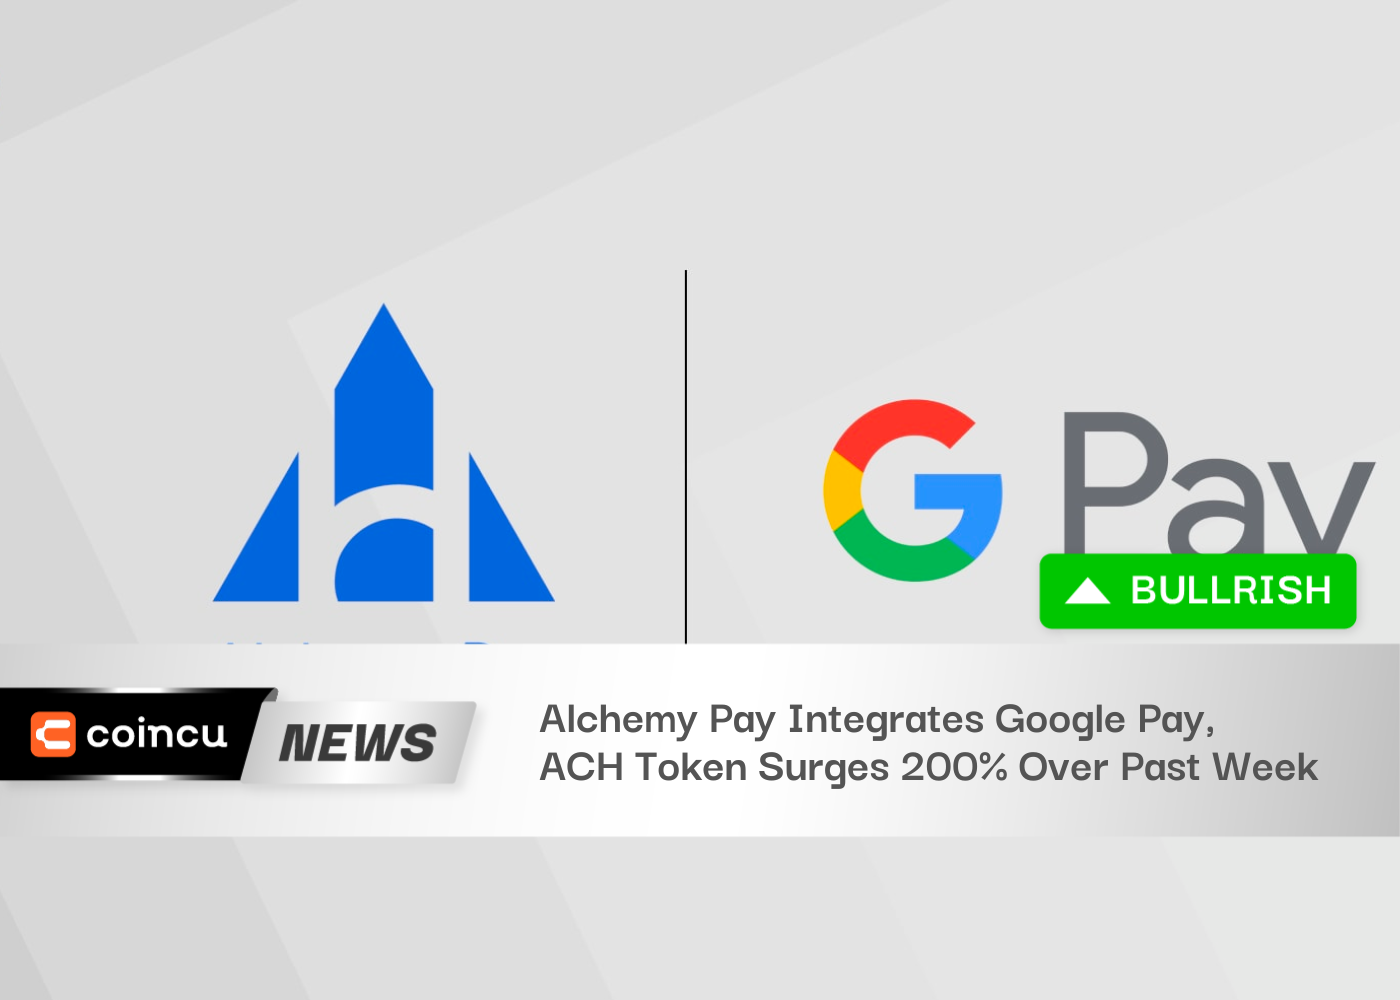 Alchemy Pay Integrates Google Pay, ACH Token Surges 200% Over Past Week